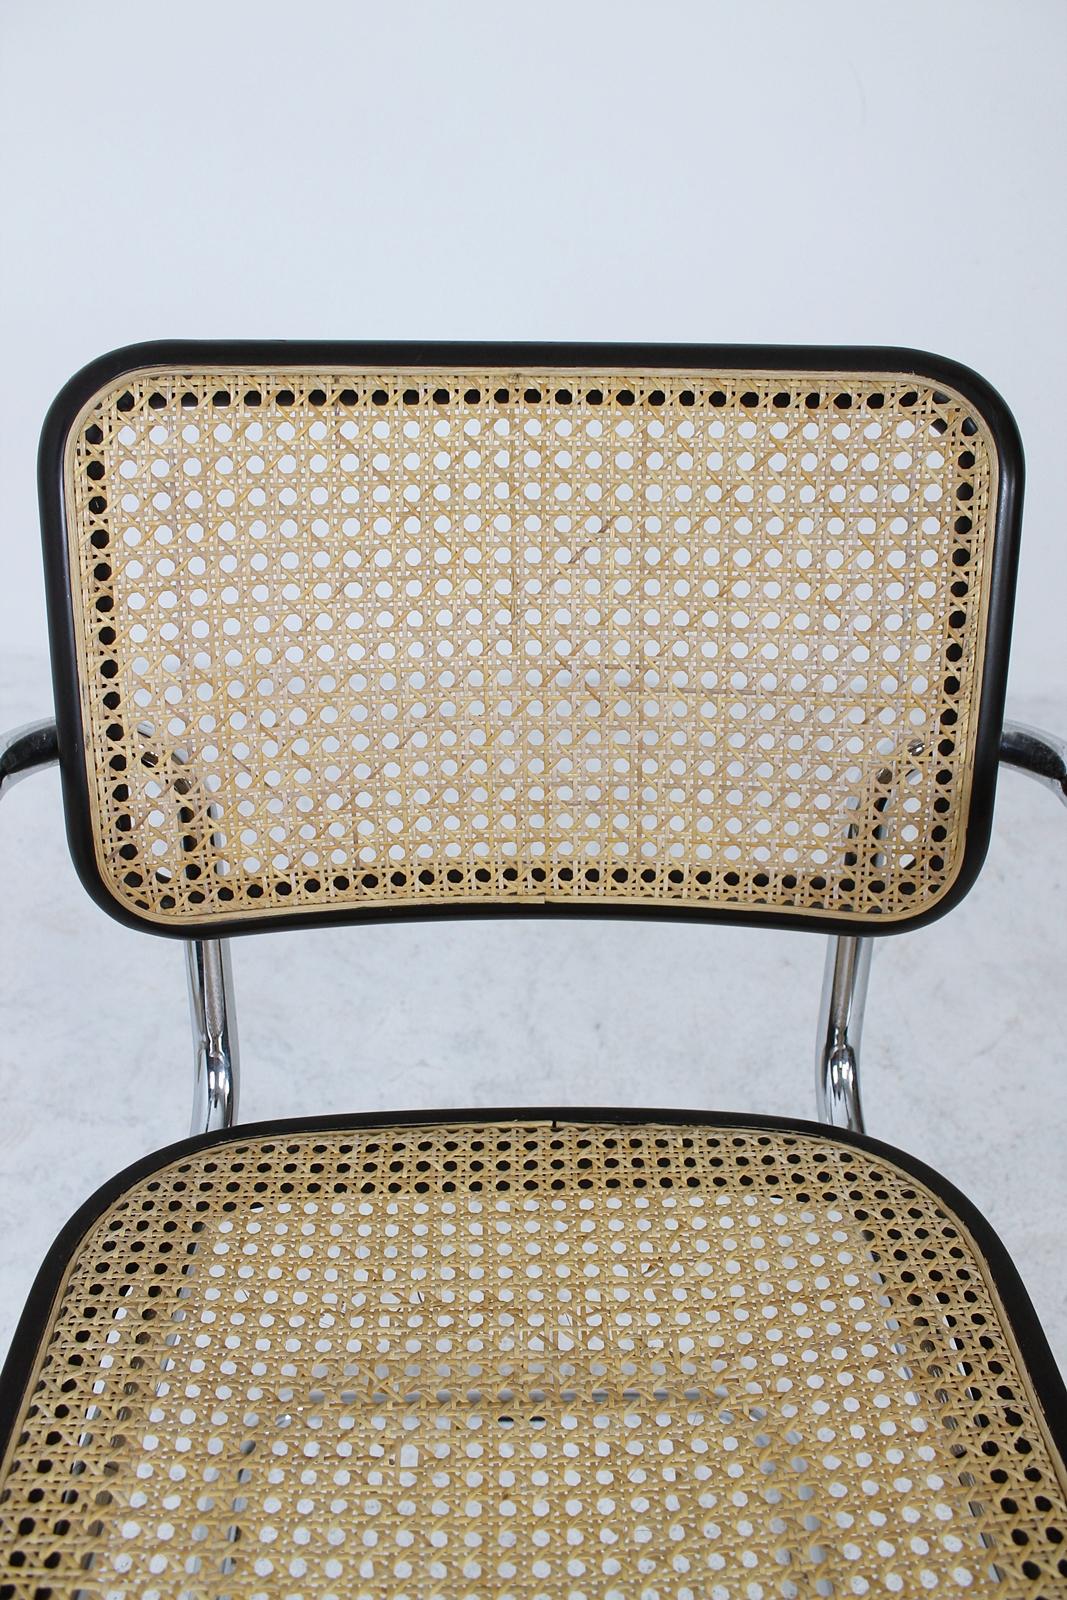 Bauhaus Icon Thonet Cantilever Armchairs Model B64 by Marcel Breuer, 1927 For Sale 3